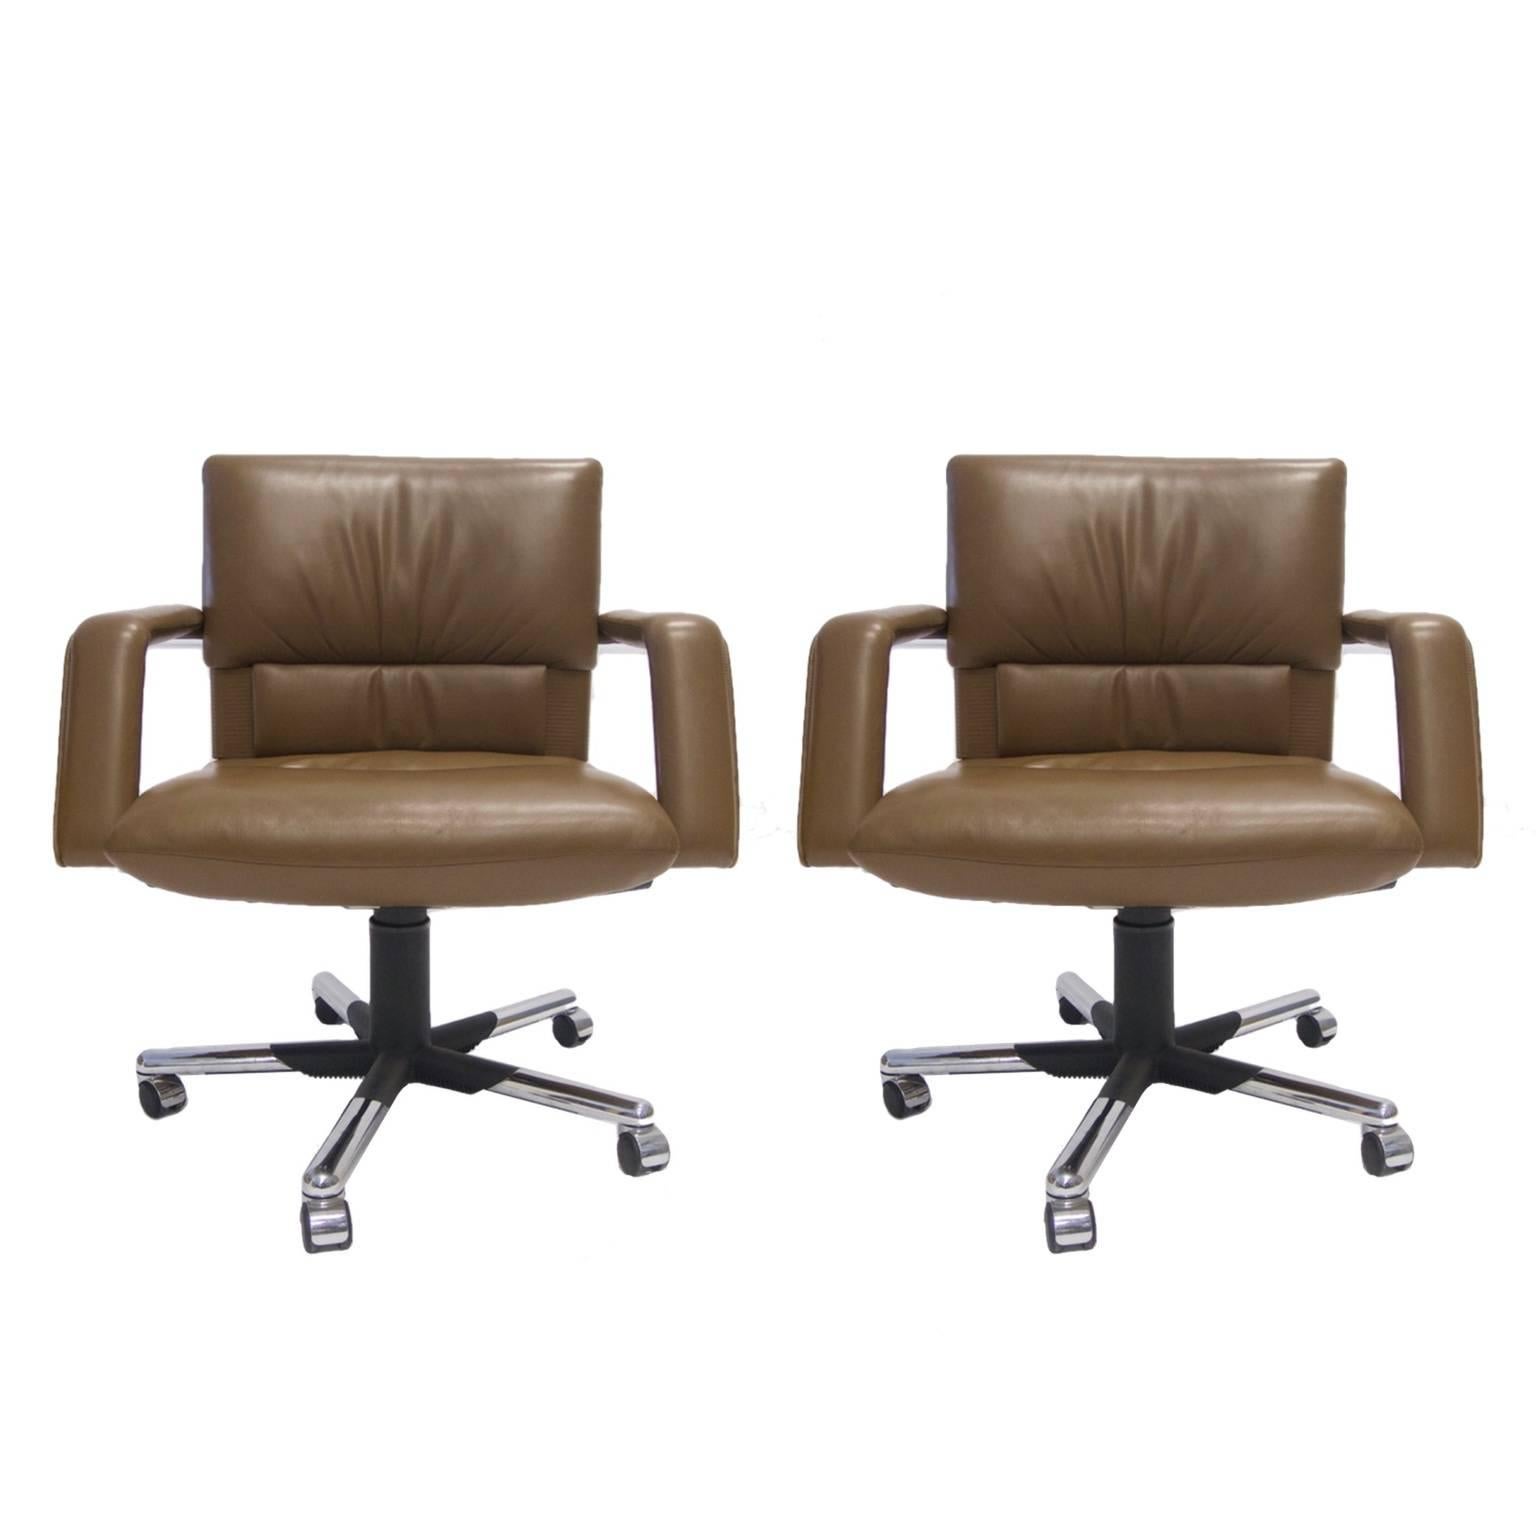 Mario Bellini for Vitra Leather Swivel and Tilt Executive Desk or Office Chair